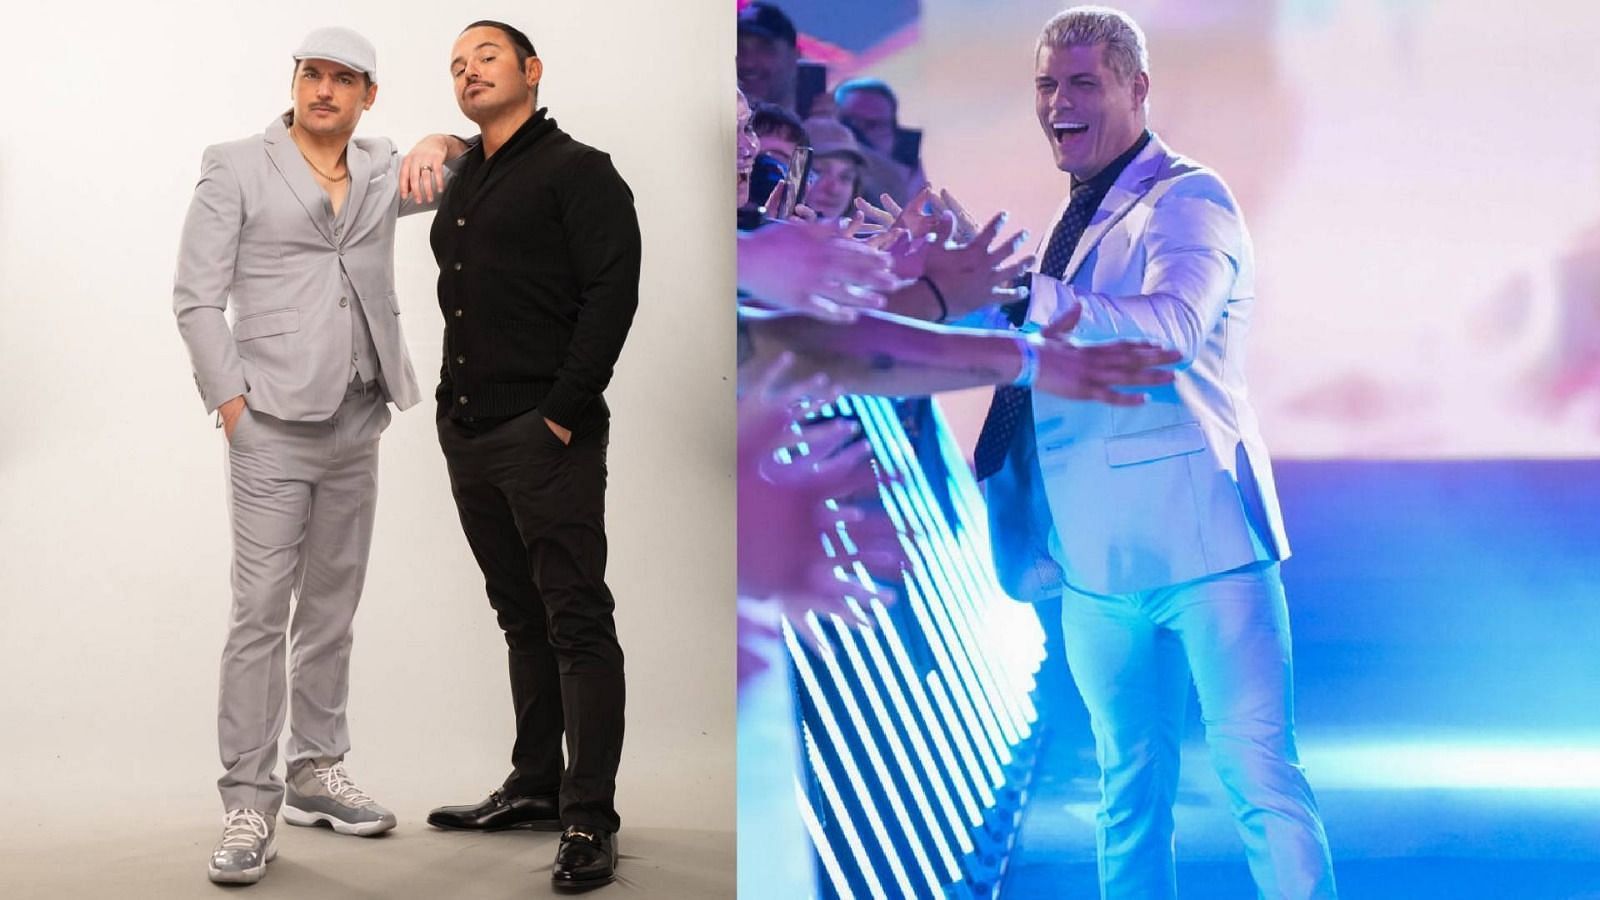 The Young Bucks are currently Executive Vice Presidents of AEW